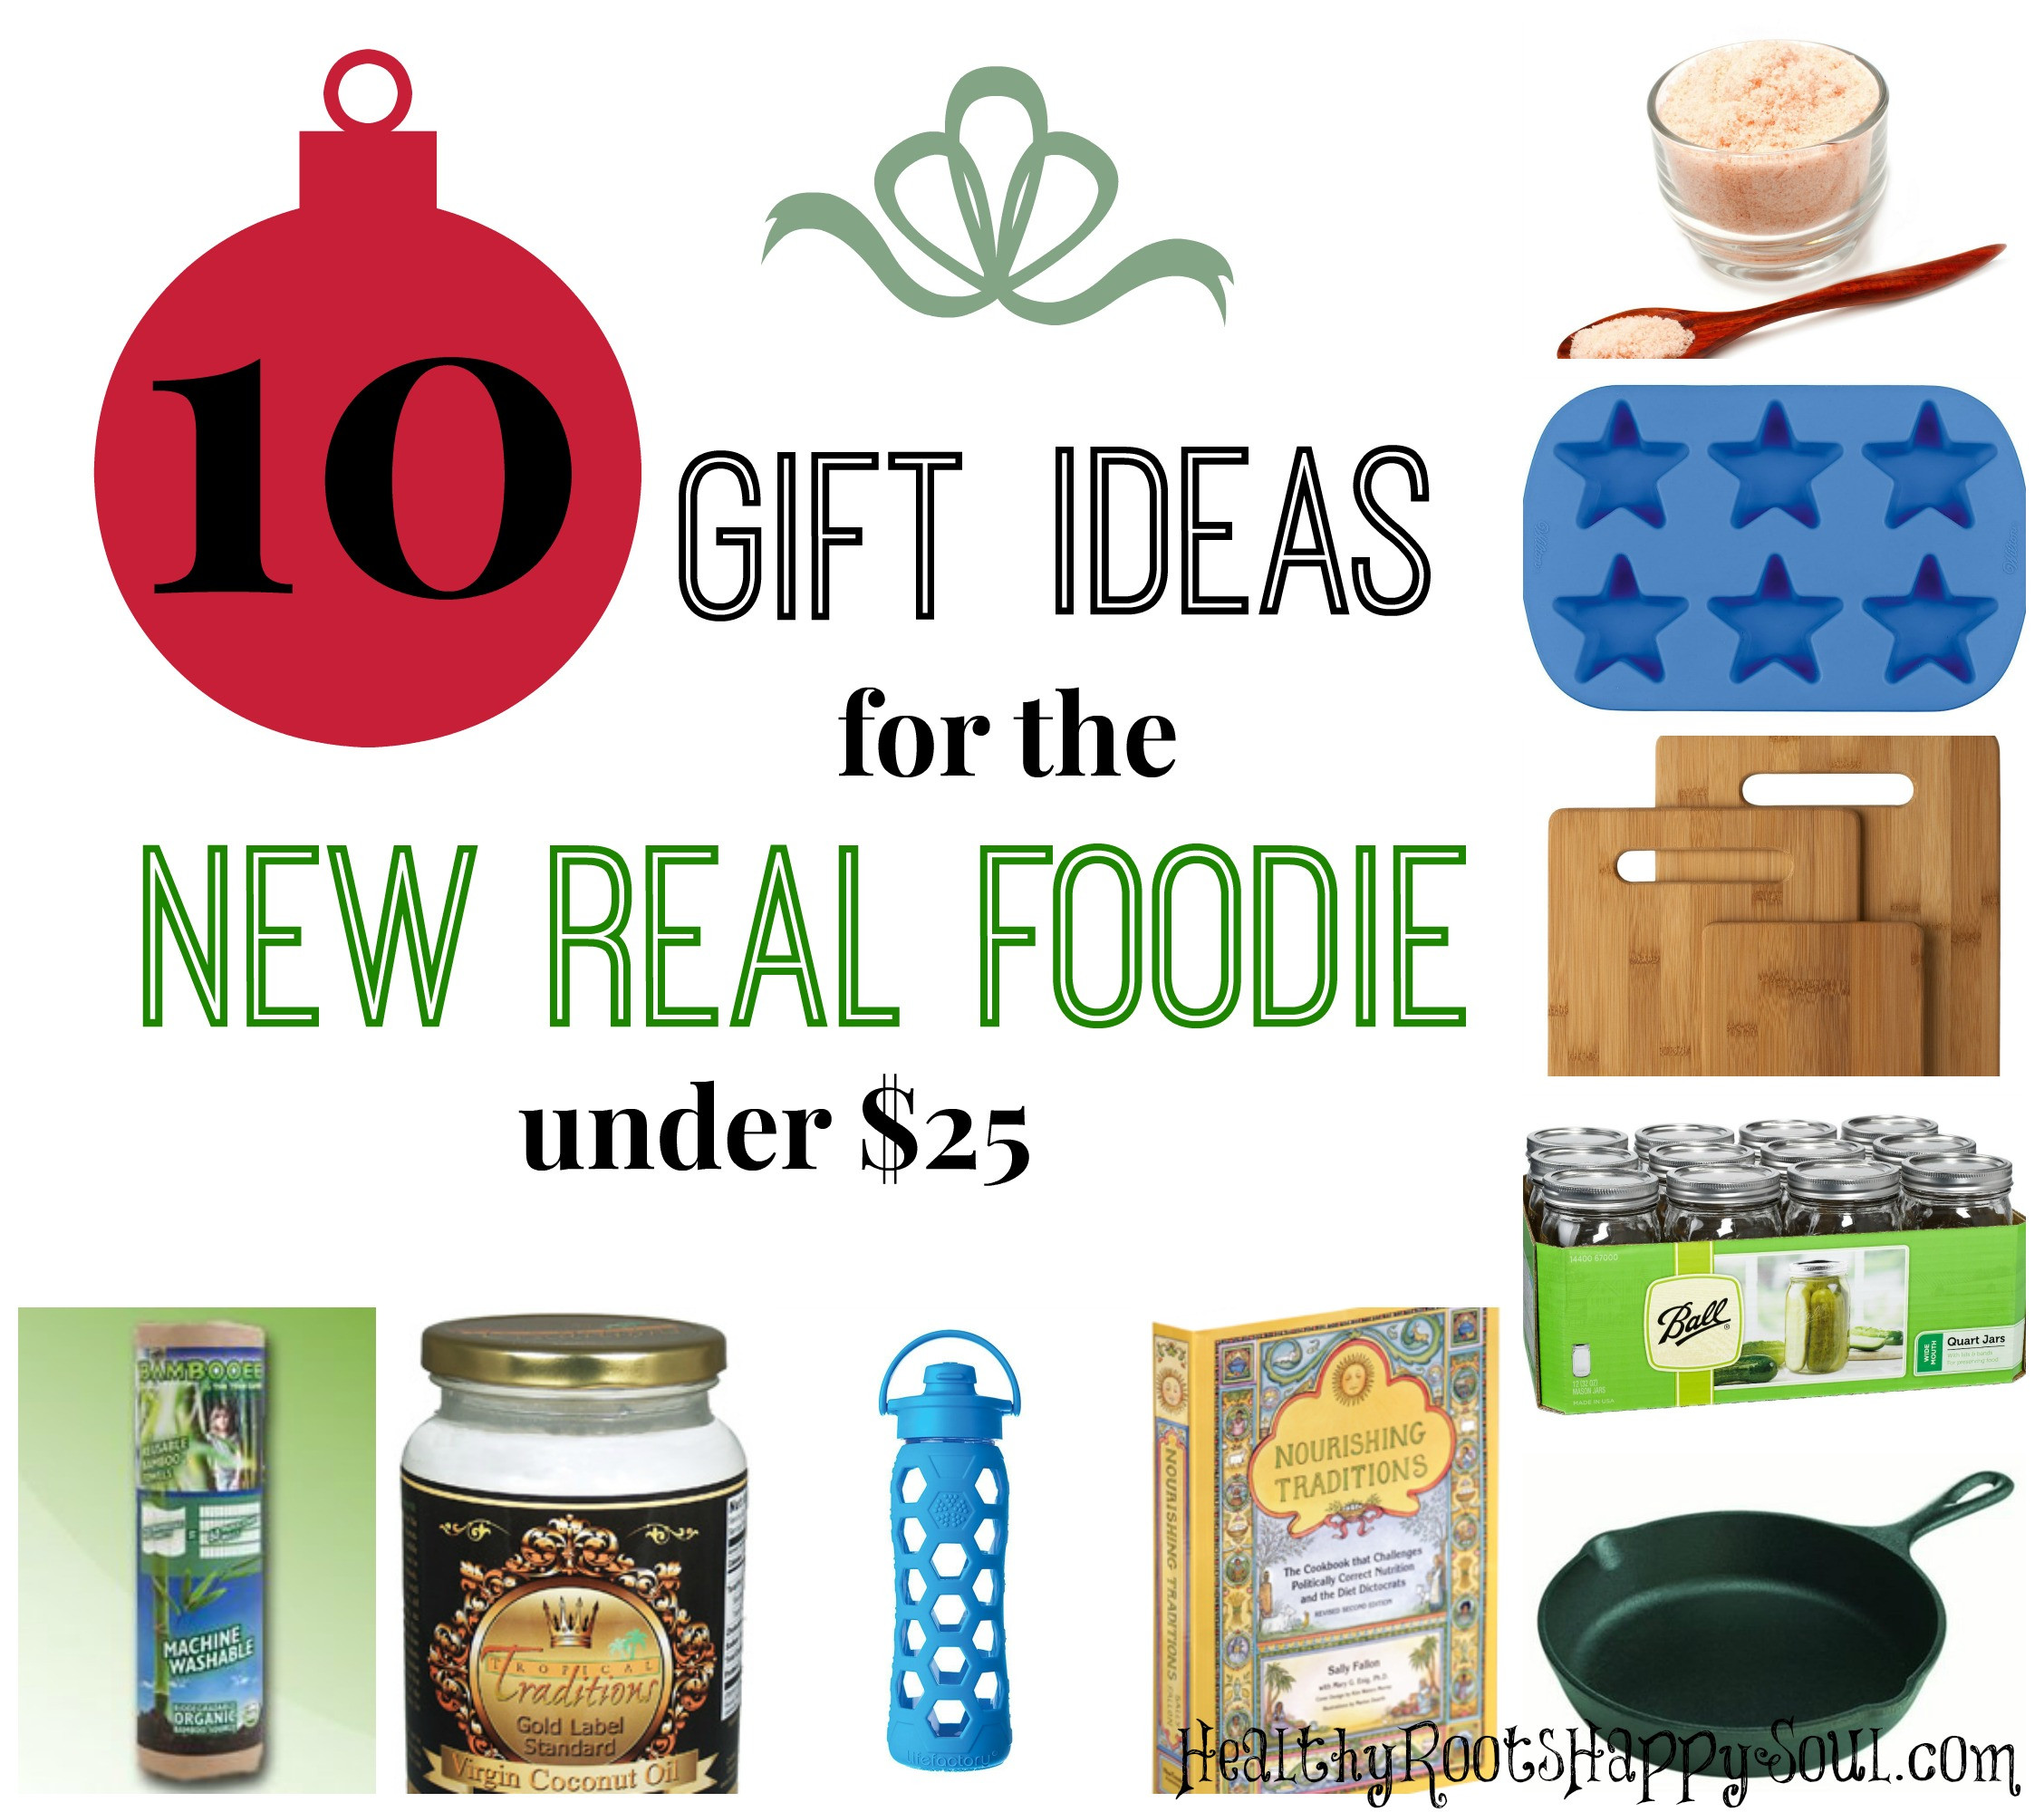 Holiday Gift Ideas For Employees Under $25
 Naturally Loriel 10 Gift Ideas for the NEW Real Foo